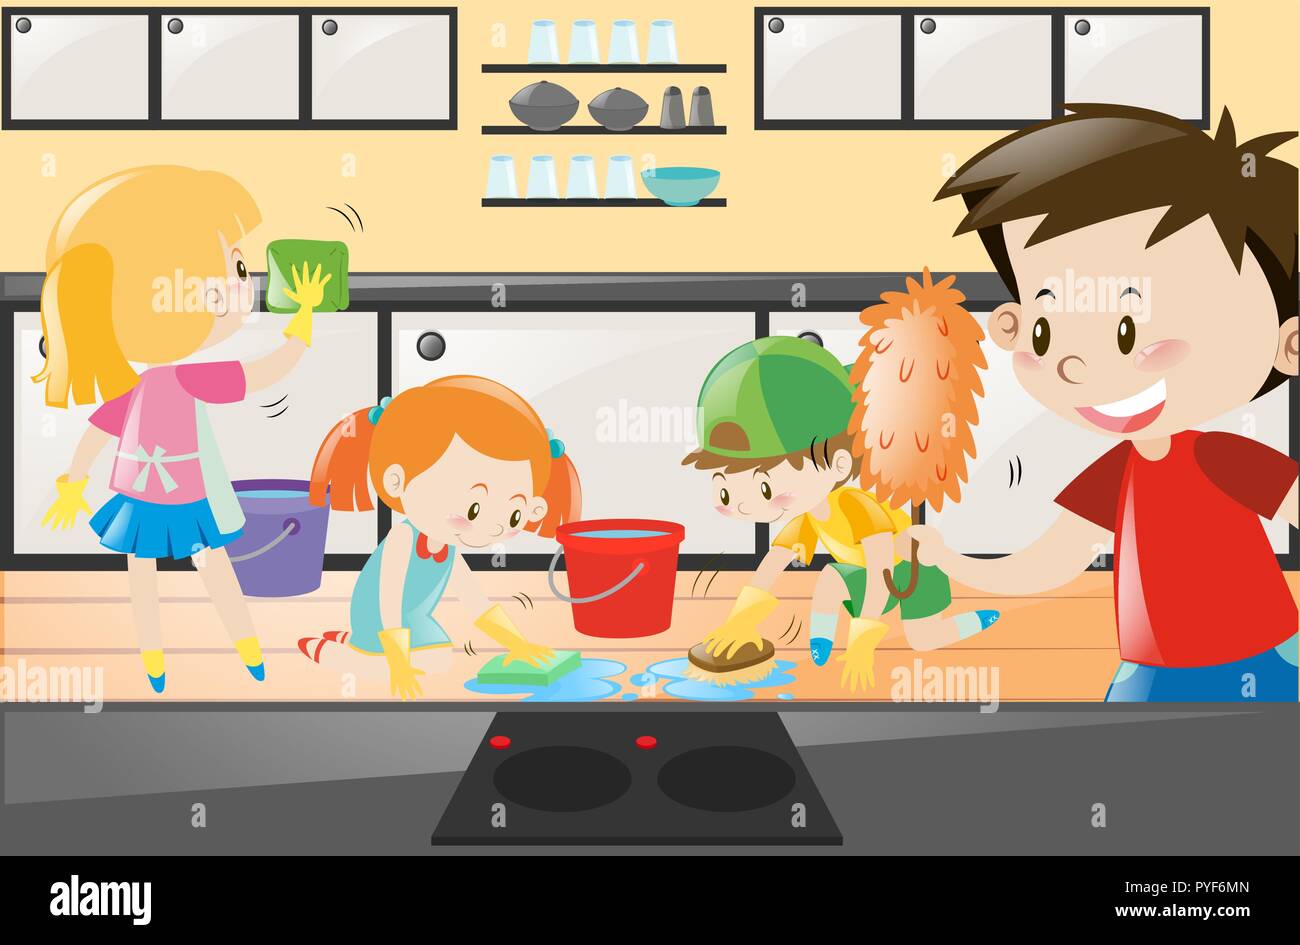 Boys and girls cleaning the kitchen illustration Stock Vector